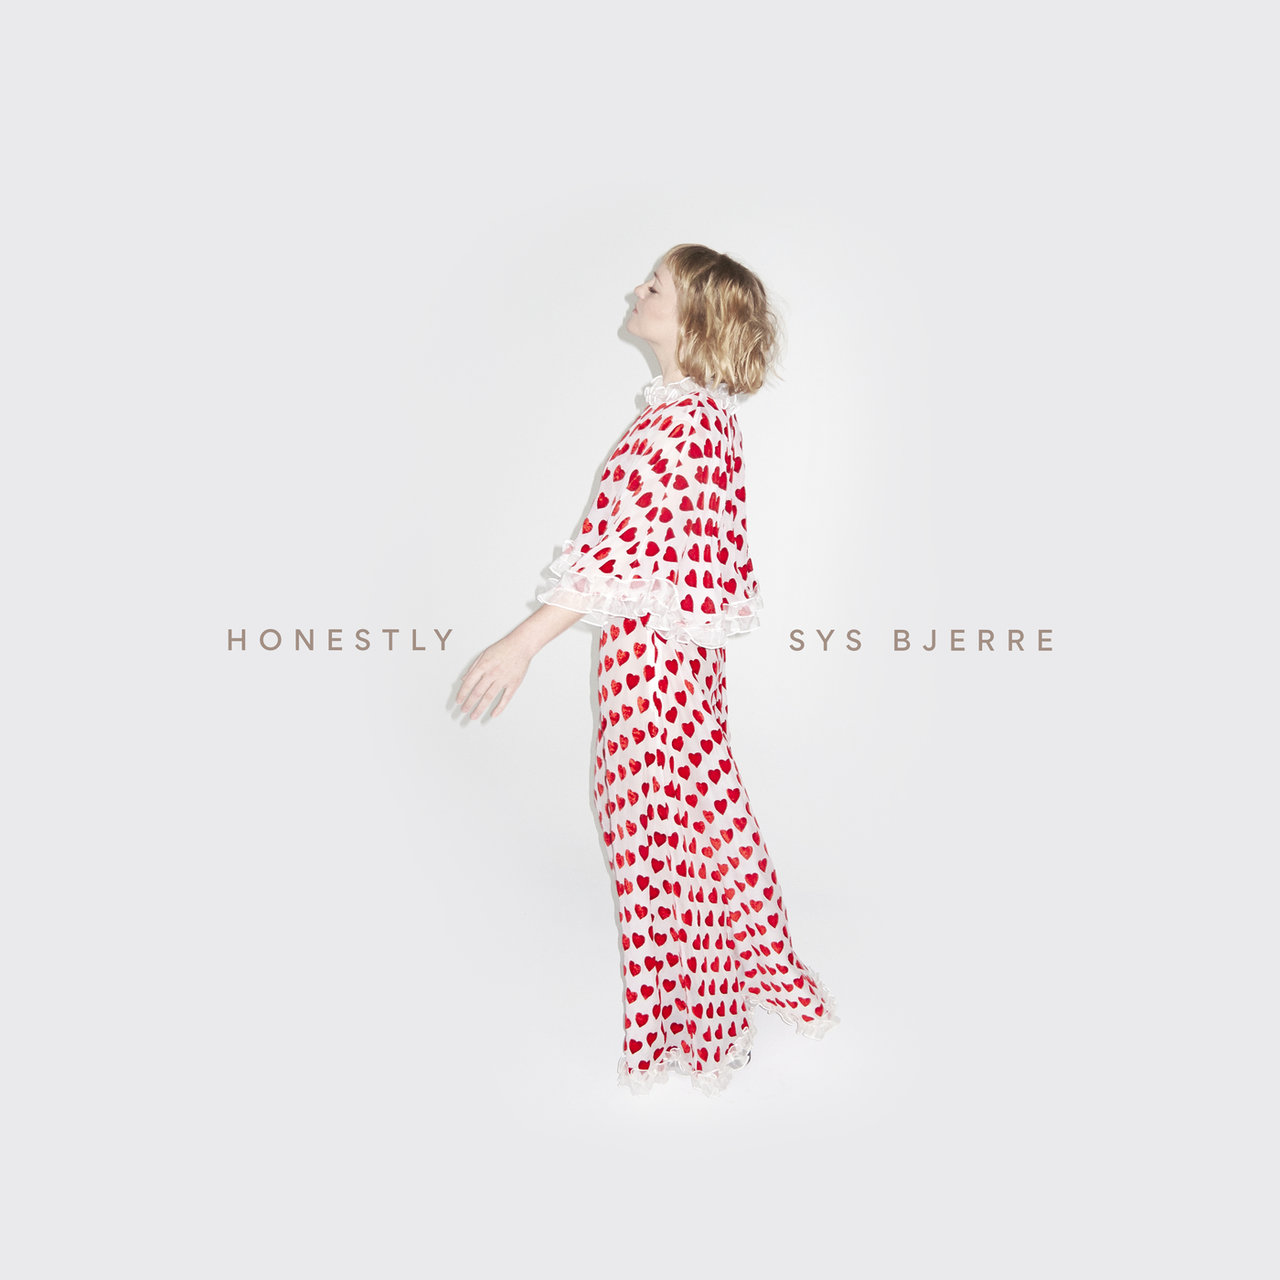 Sys Bjerre Honestly cover artwork